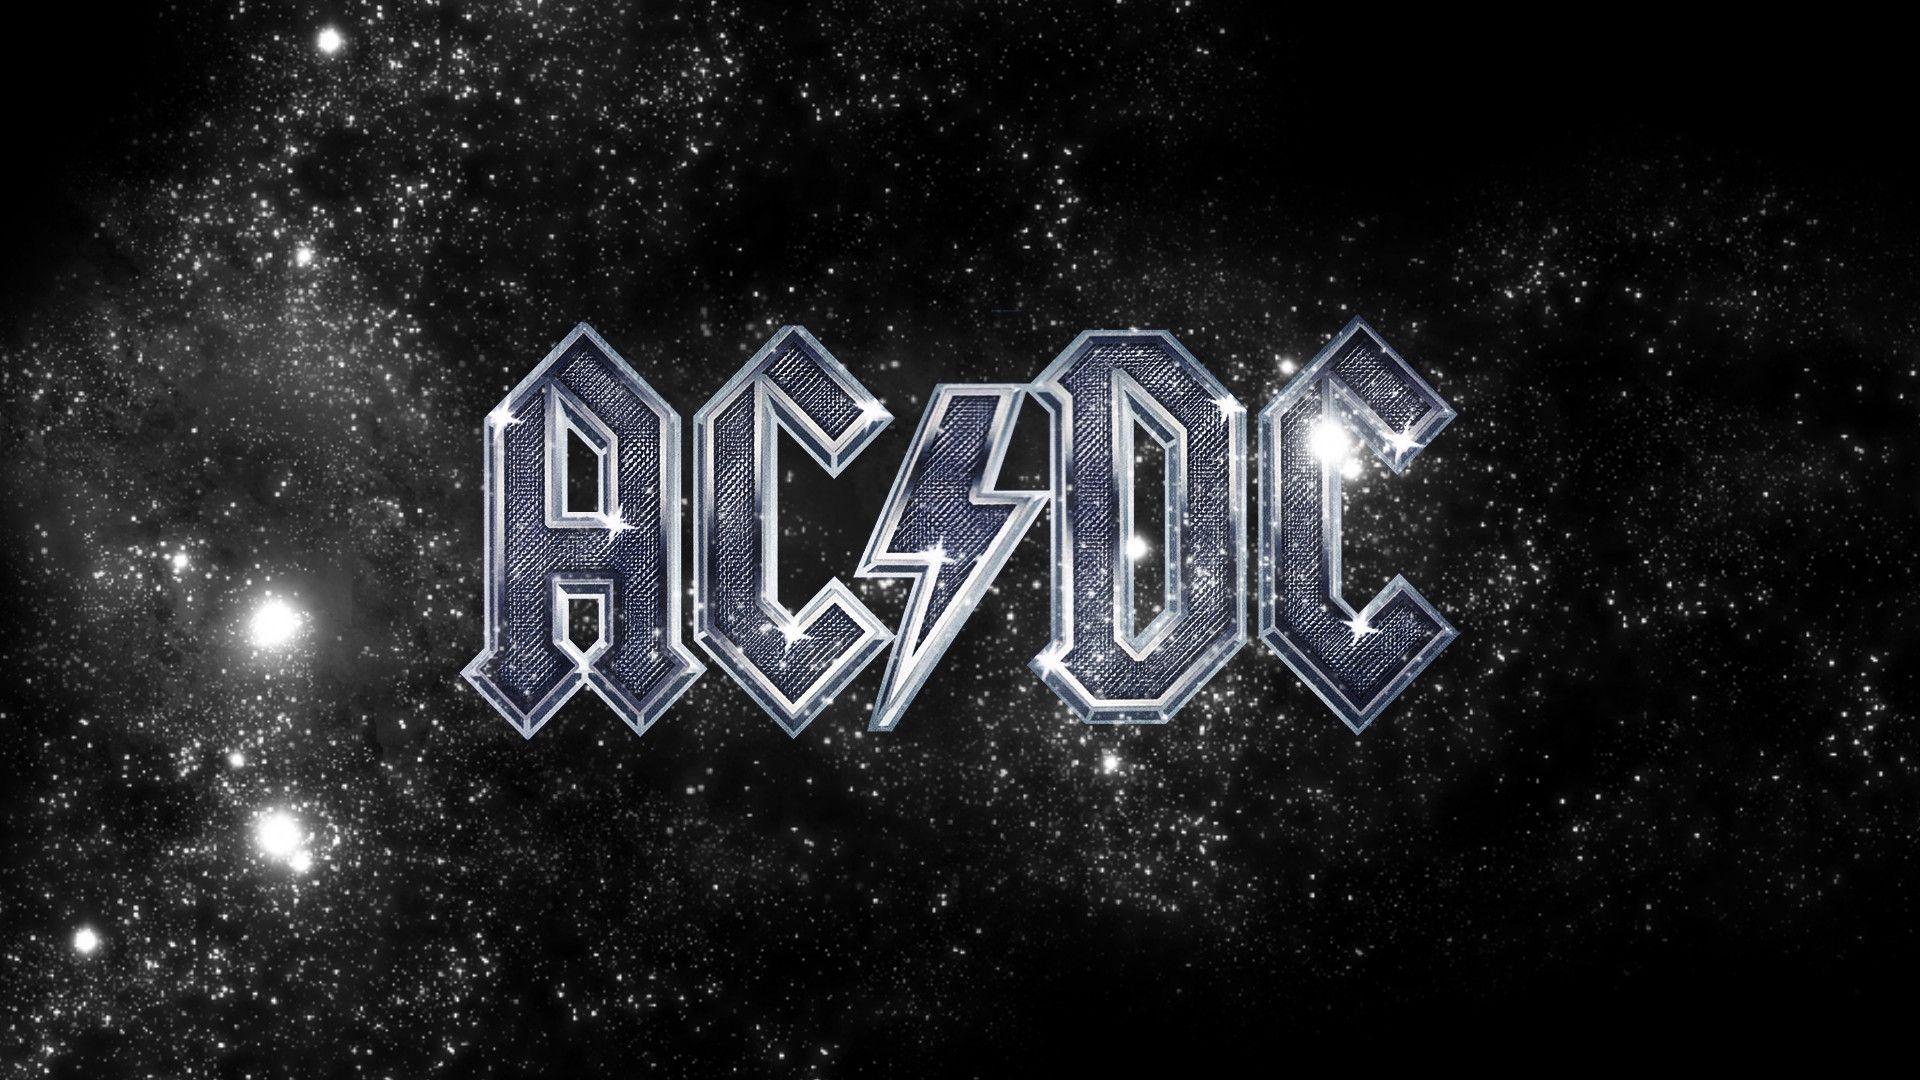 HDQ Cover Wallpaper: AC DC Wallpaper Free, AC DC Photo For. Epic